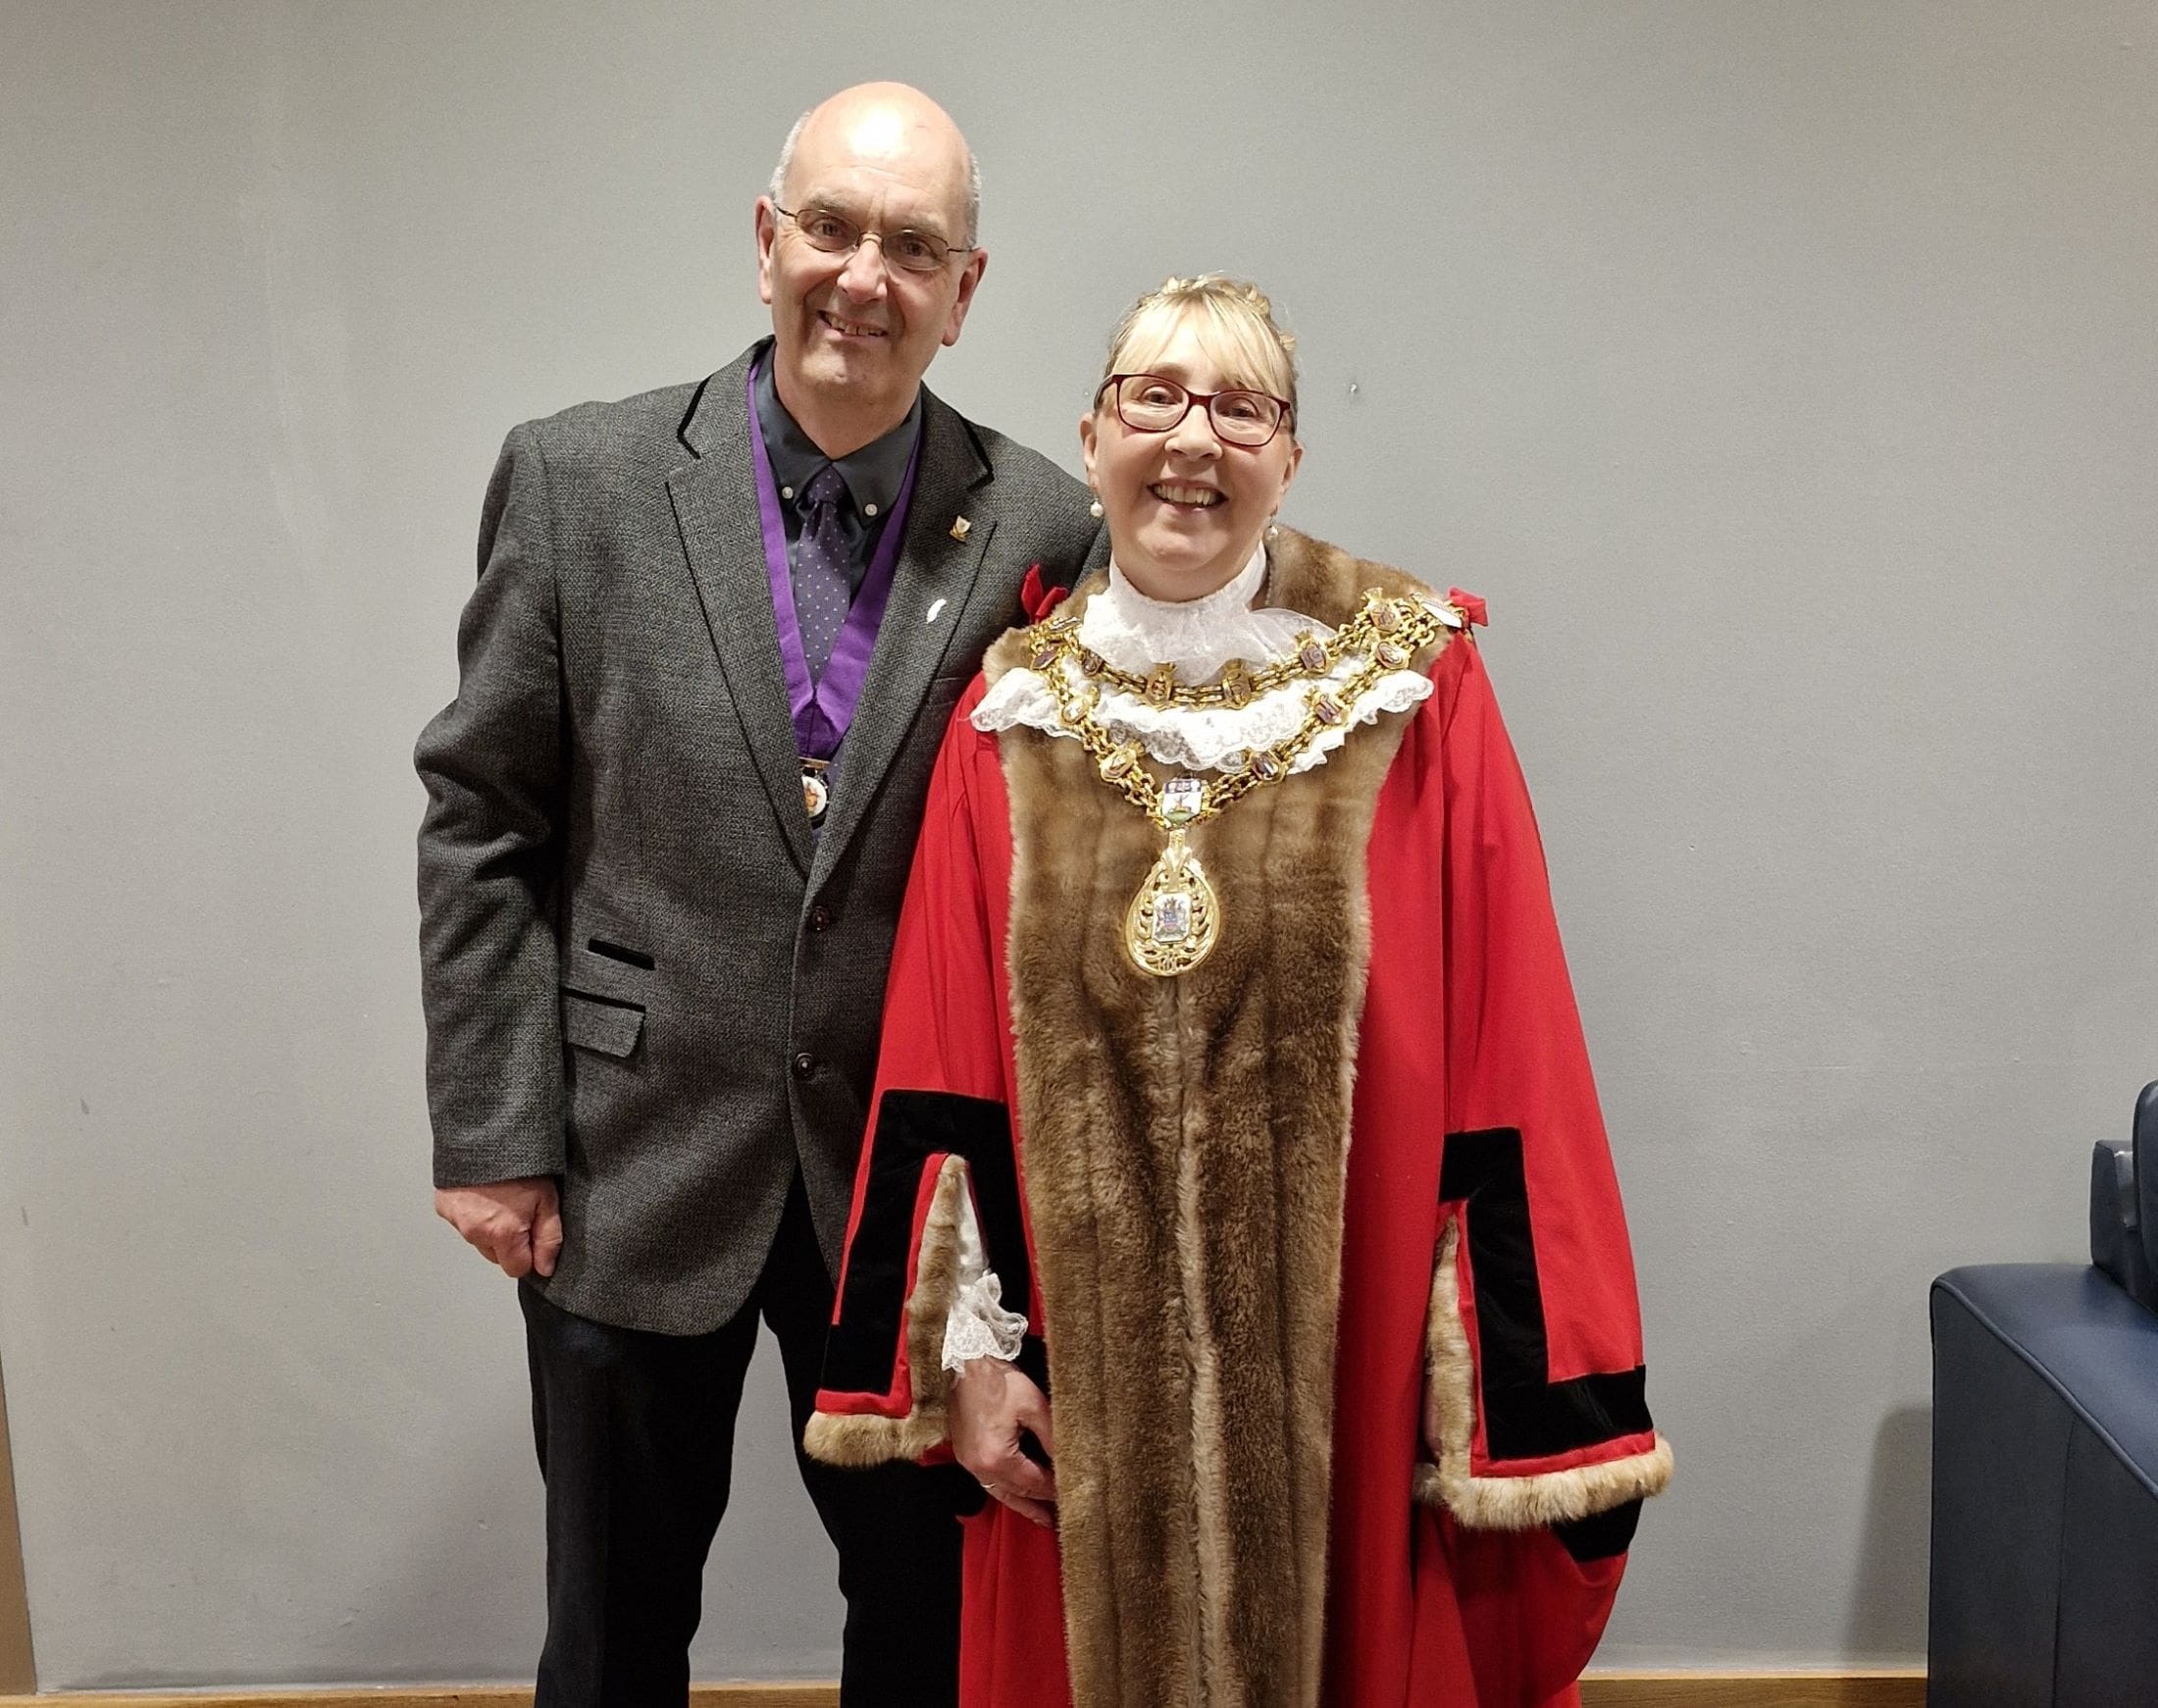 Mayor and Consort in Council Chamber